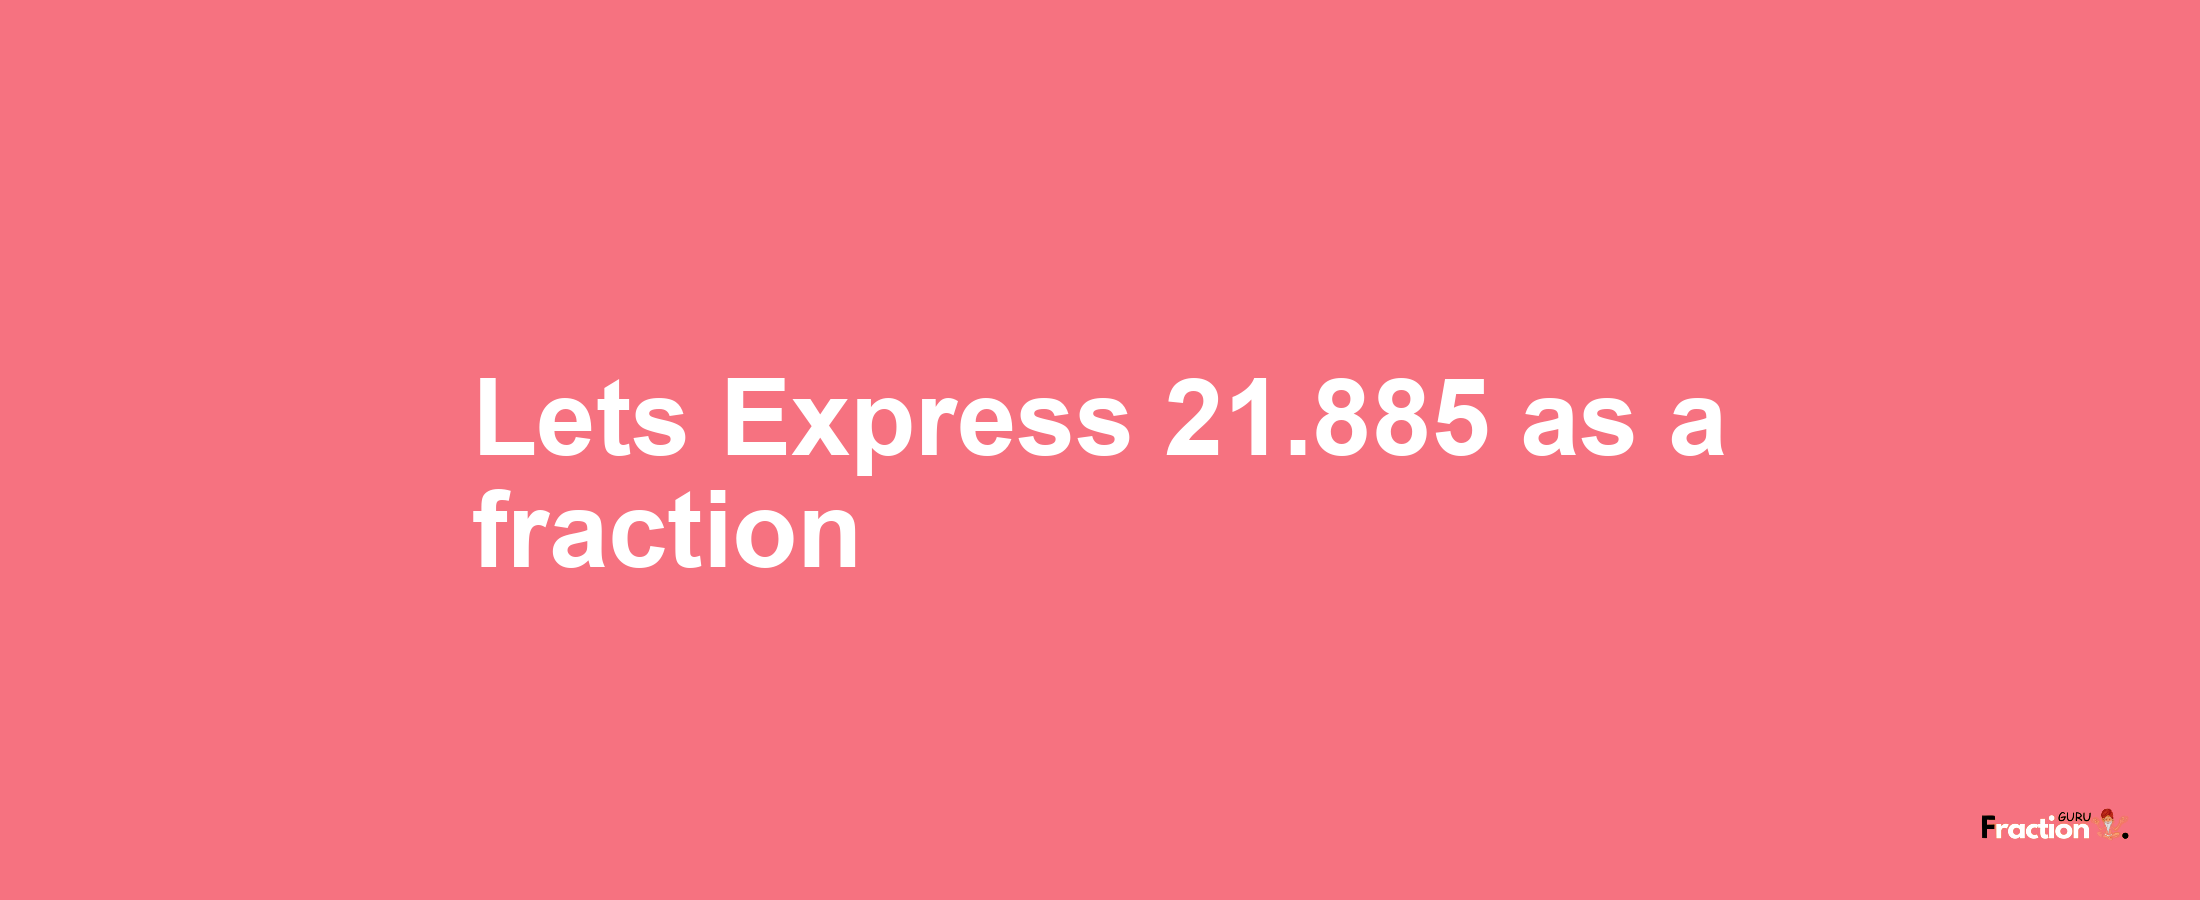 Lets Express 21.885 as afraction